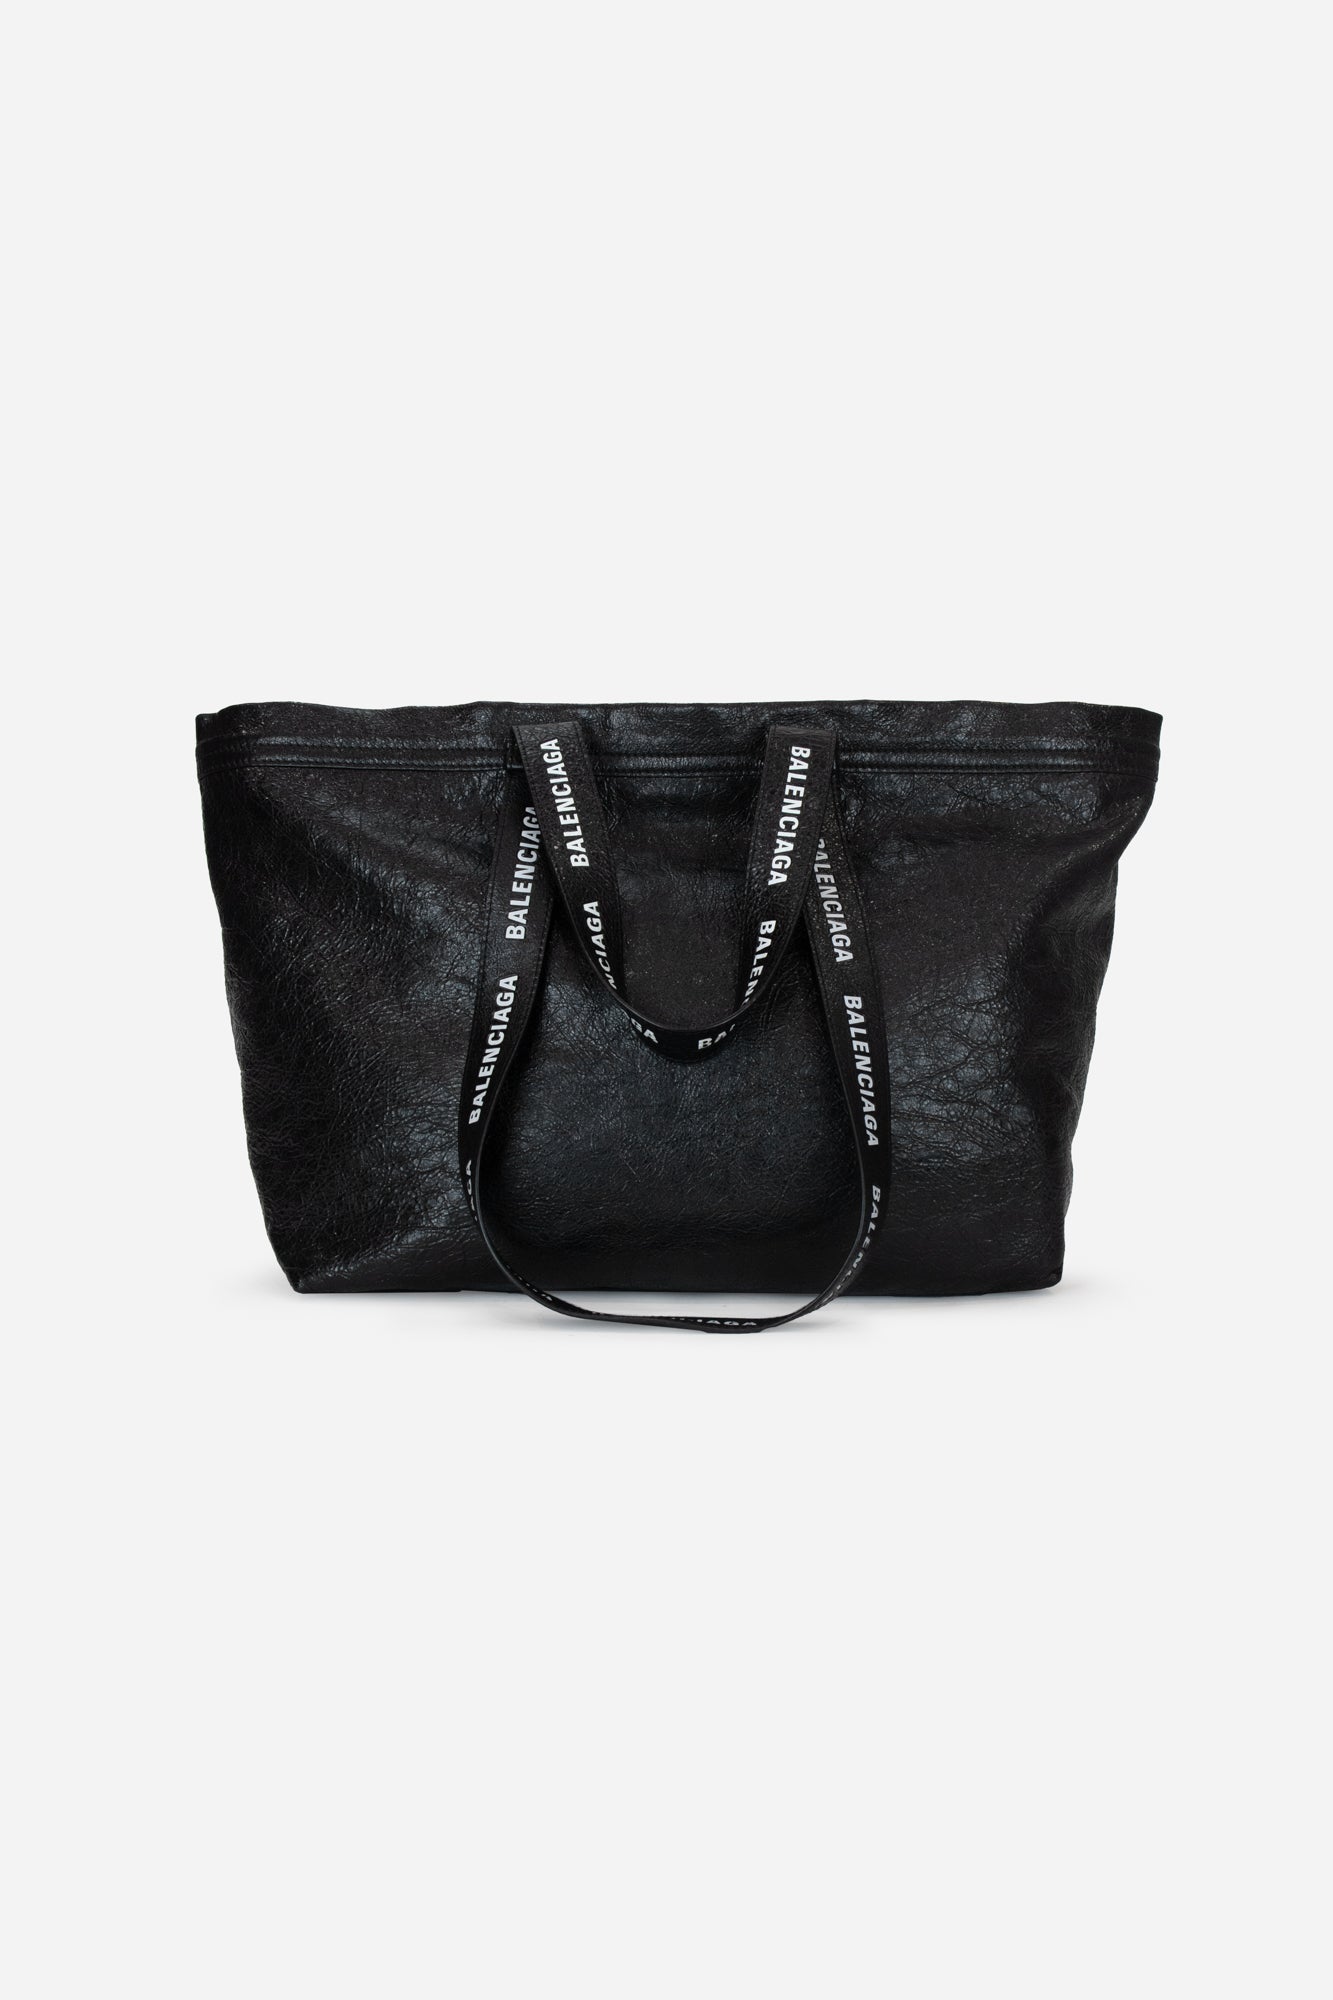 Black Double Strapped Tote With White Logo